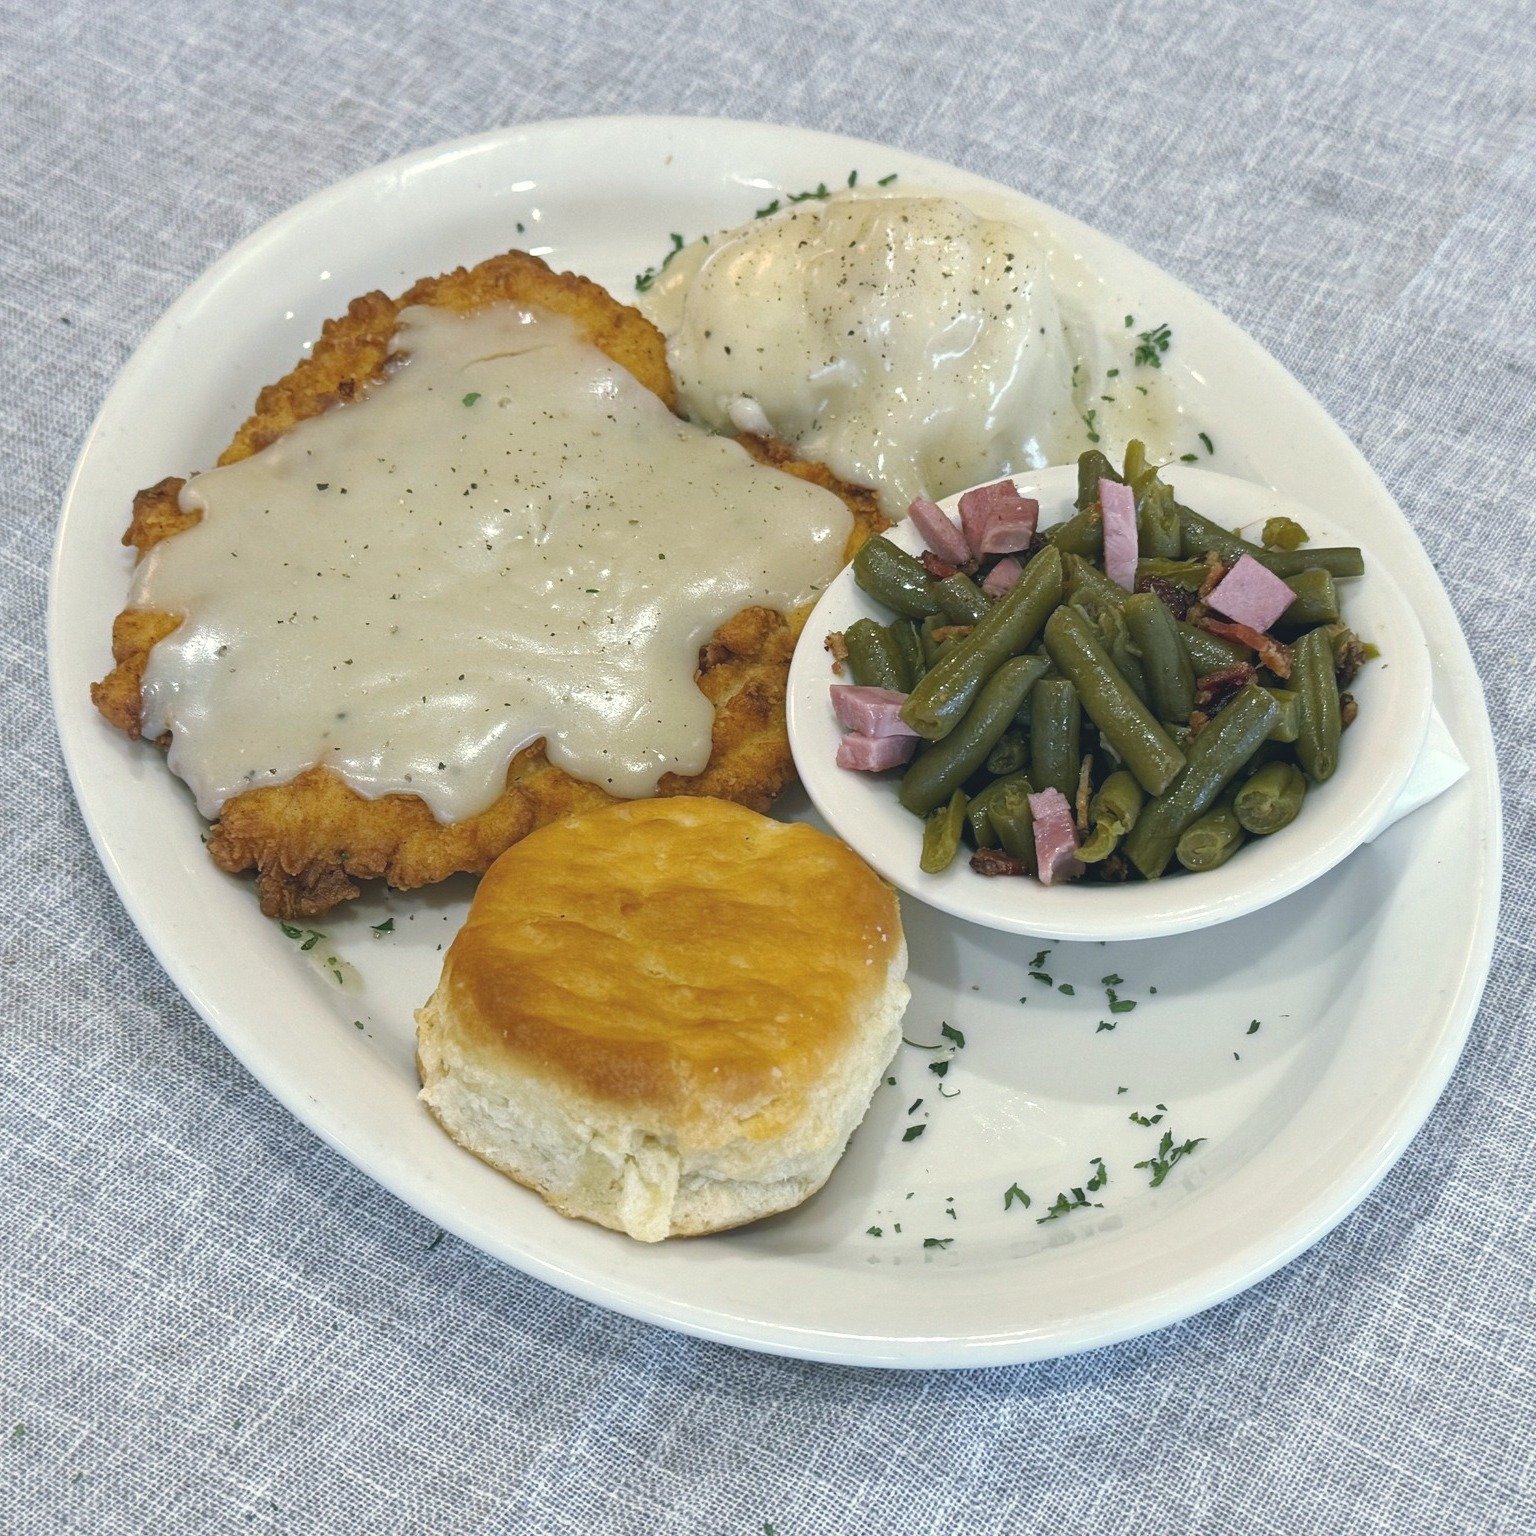 At Richie&rsquo;s Diner Rancho Cucamonga we are all &lsquo;bout the Classics. Have you tried our famous Diddy&rsquo;s Chicken Fried Steak? Enjoy a generous 1/3 lb., USDA Choice steak, breaded and deep-fried, served with real mashed potatoes, both top